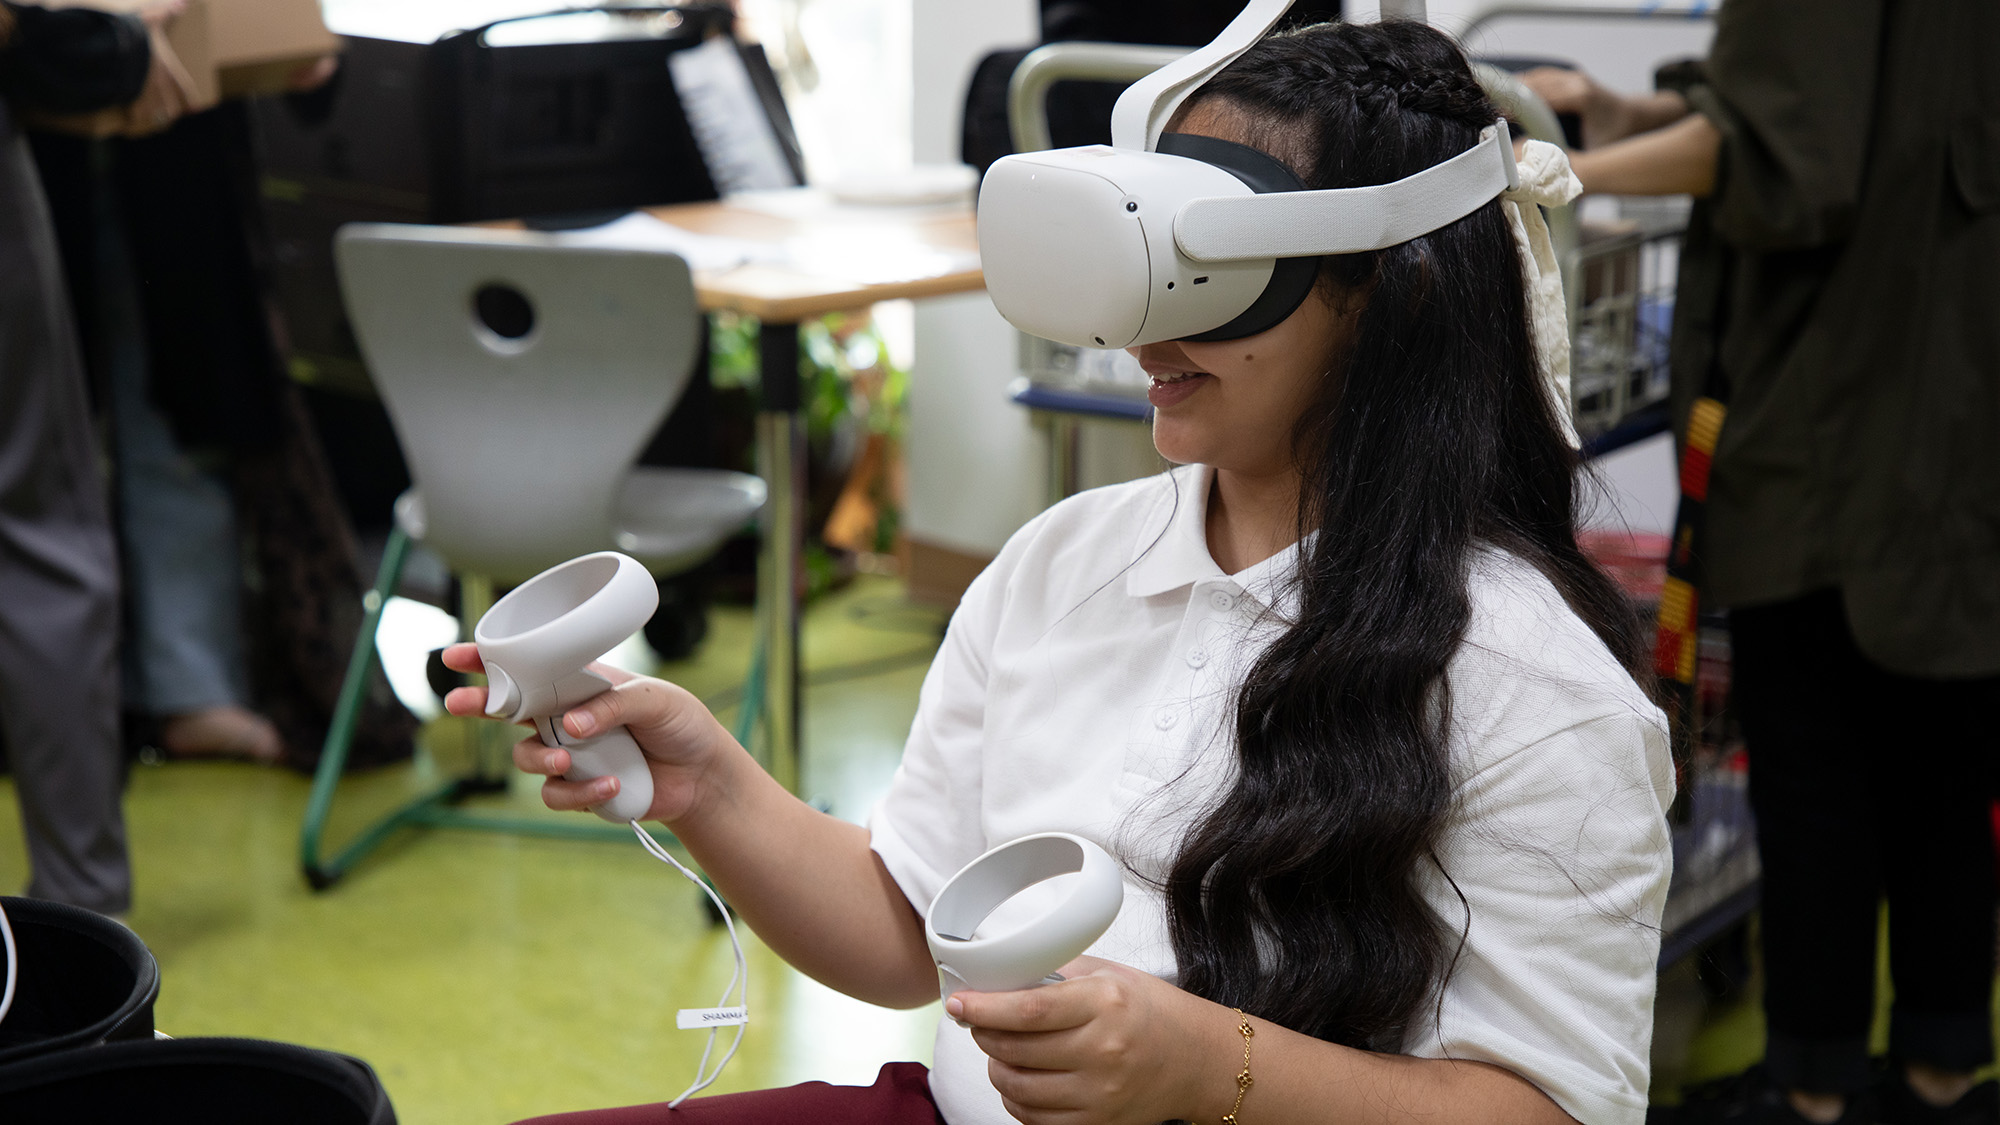 A Qatar Academy student using a virtual reality headset and paddles during the class